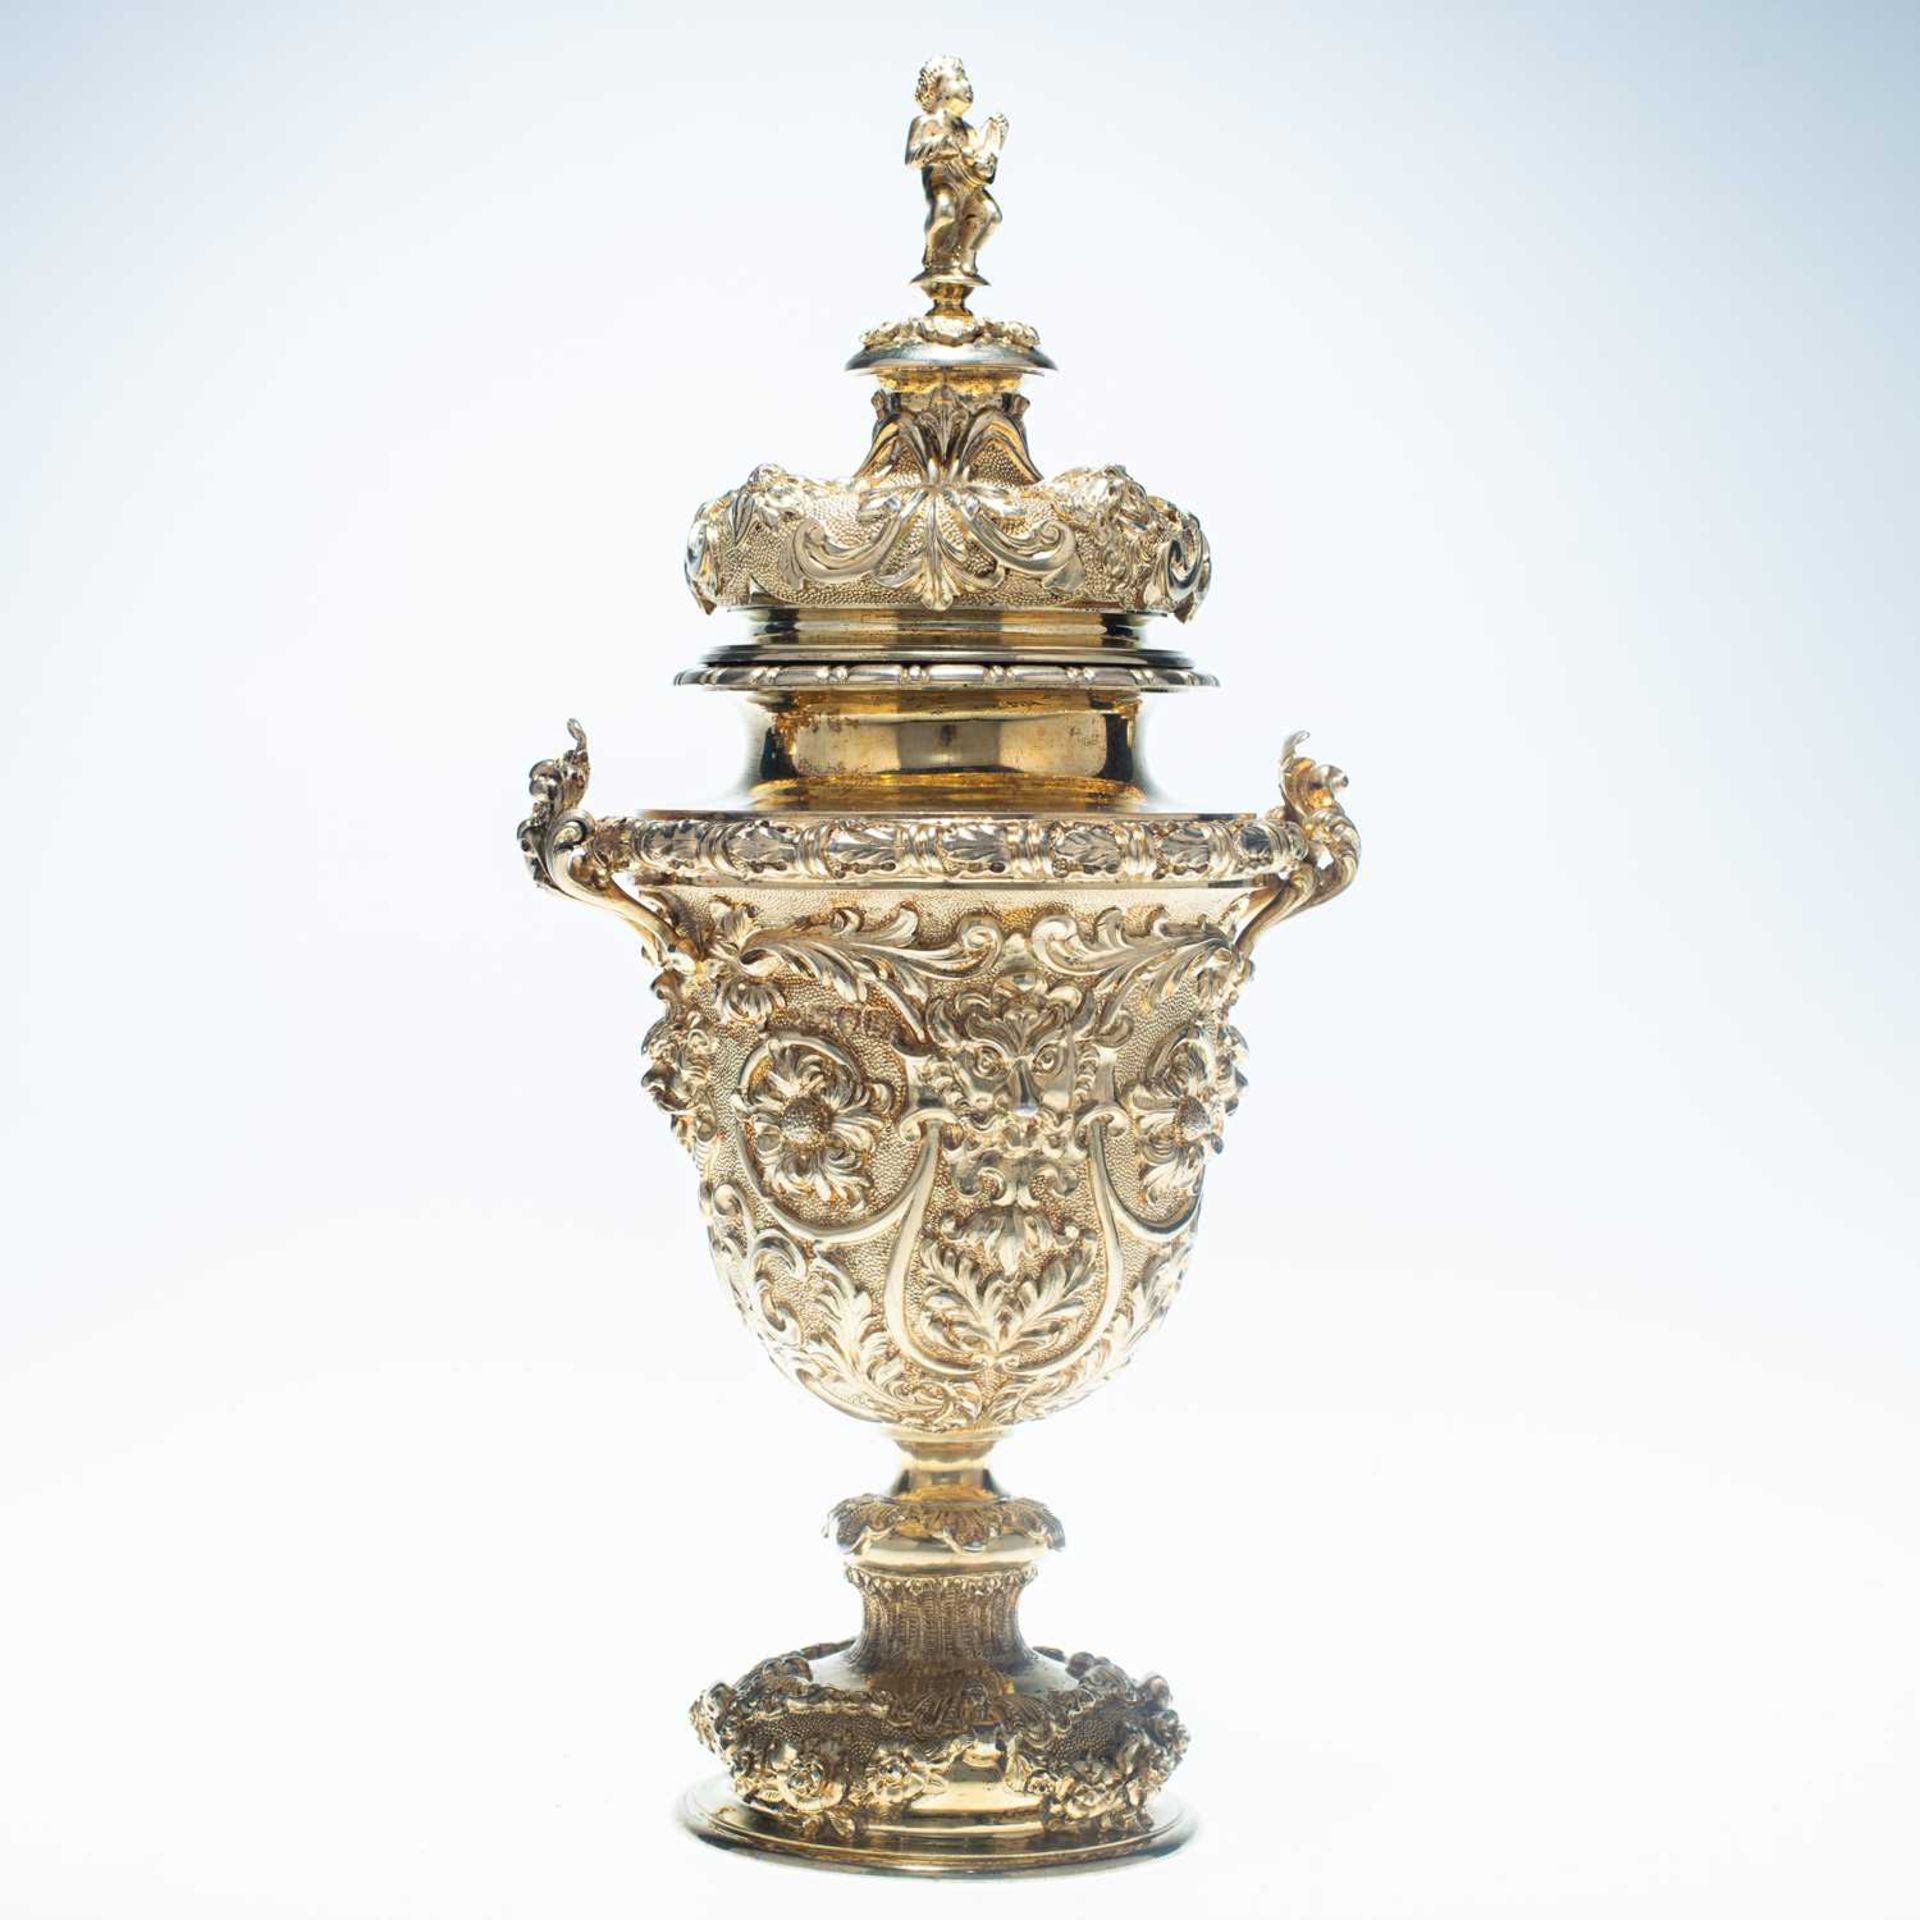 A FINE EDWARDIAN SILVER-GILT CUP AND COVER